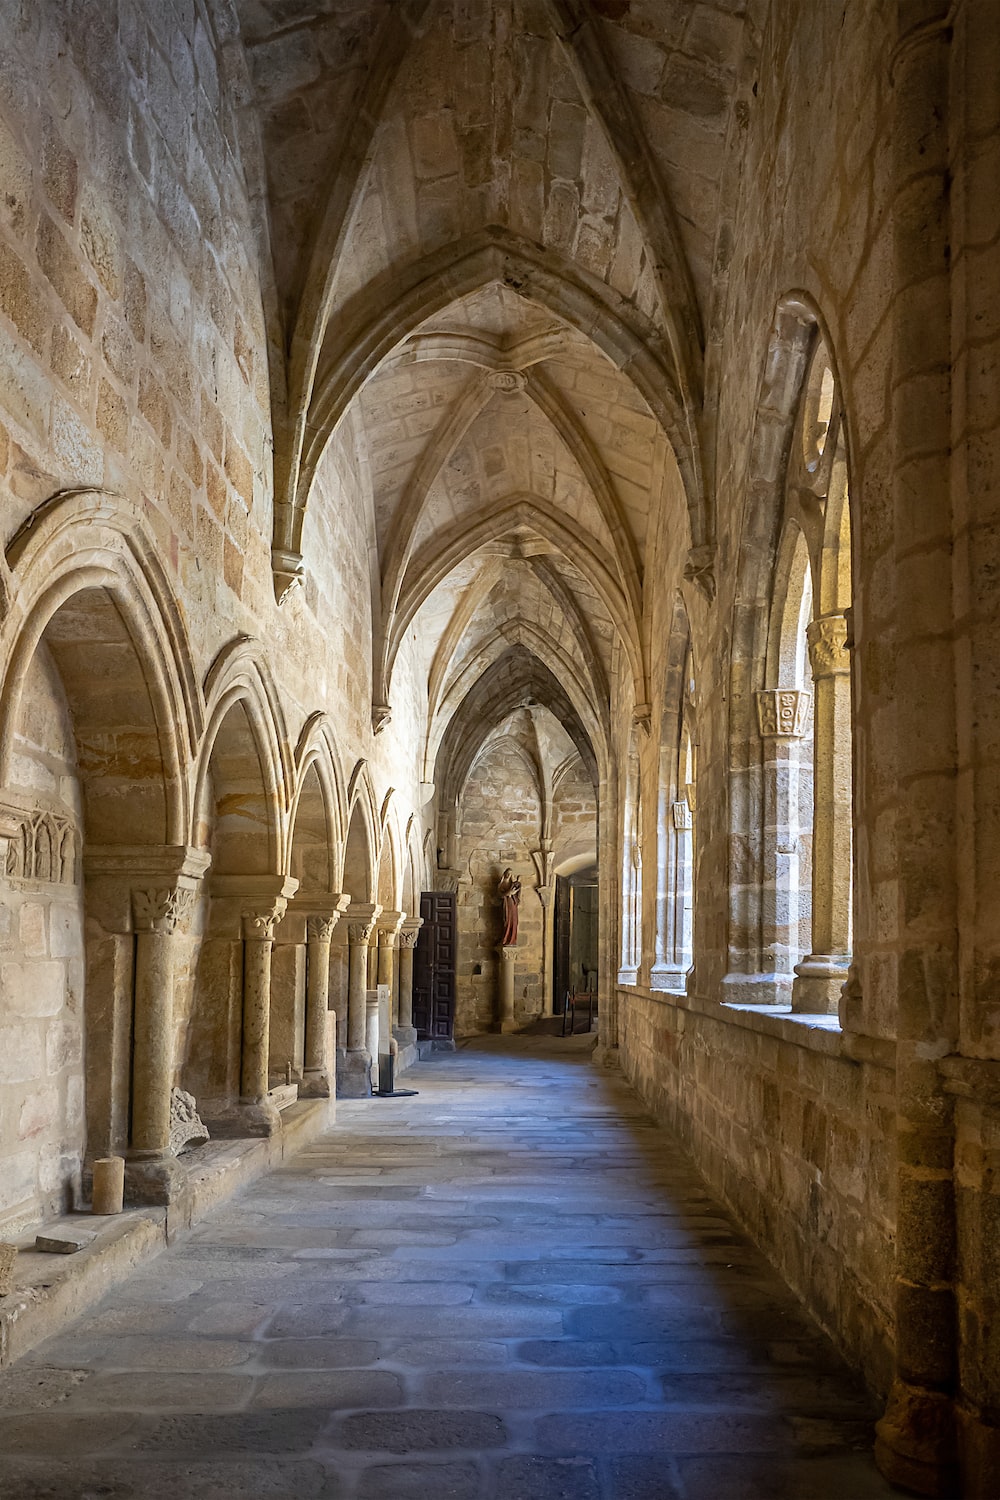 a long hallway with stone walls and arches